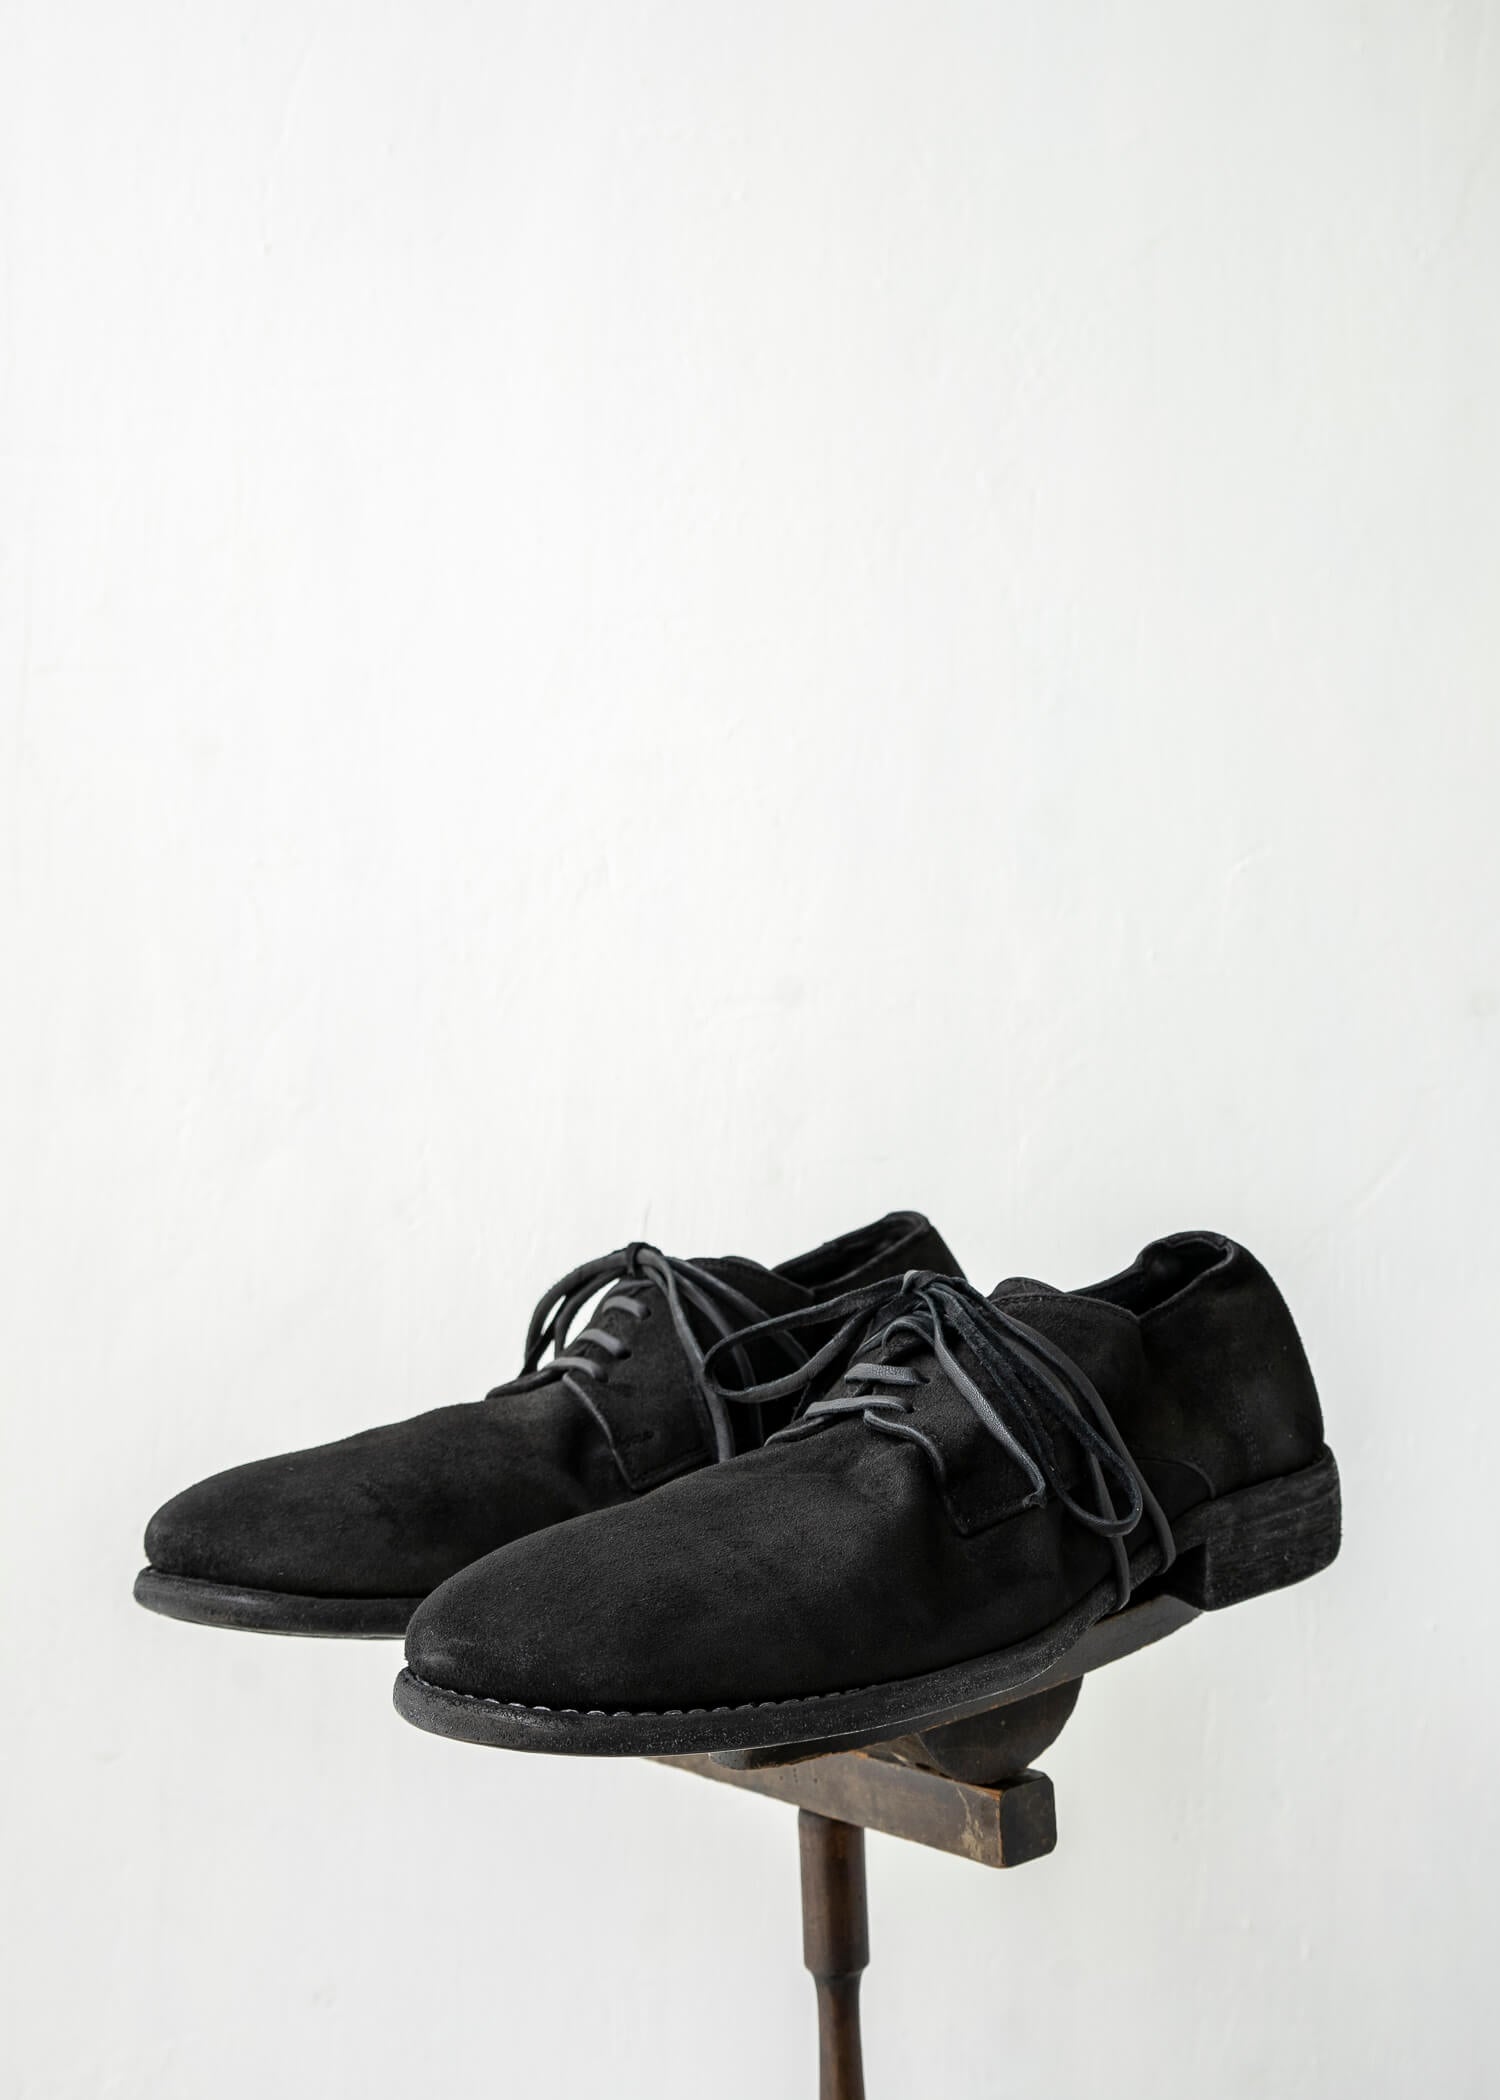 GUIDI "992X" CLASSIC DERBY / SOLE LEATHER / HORSE REVERSE / BLKT